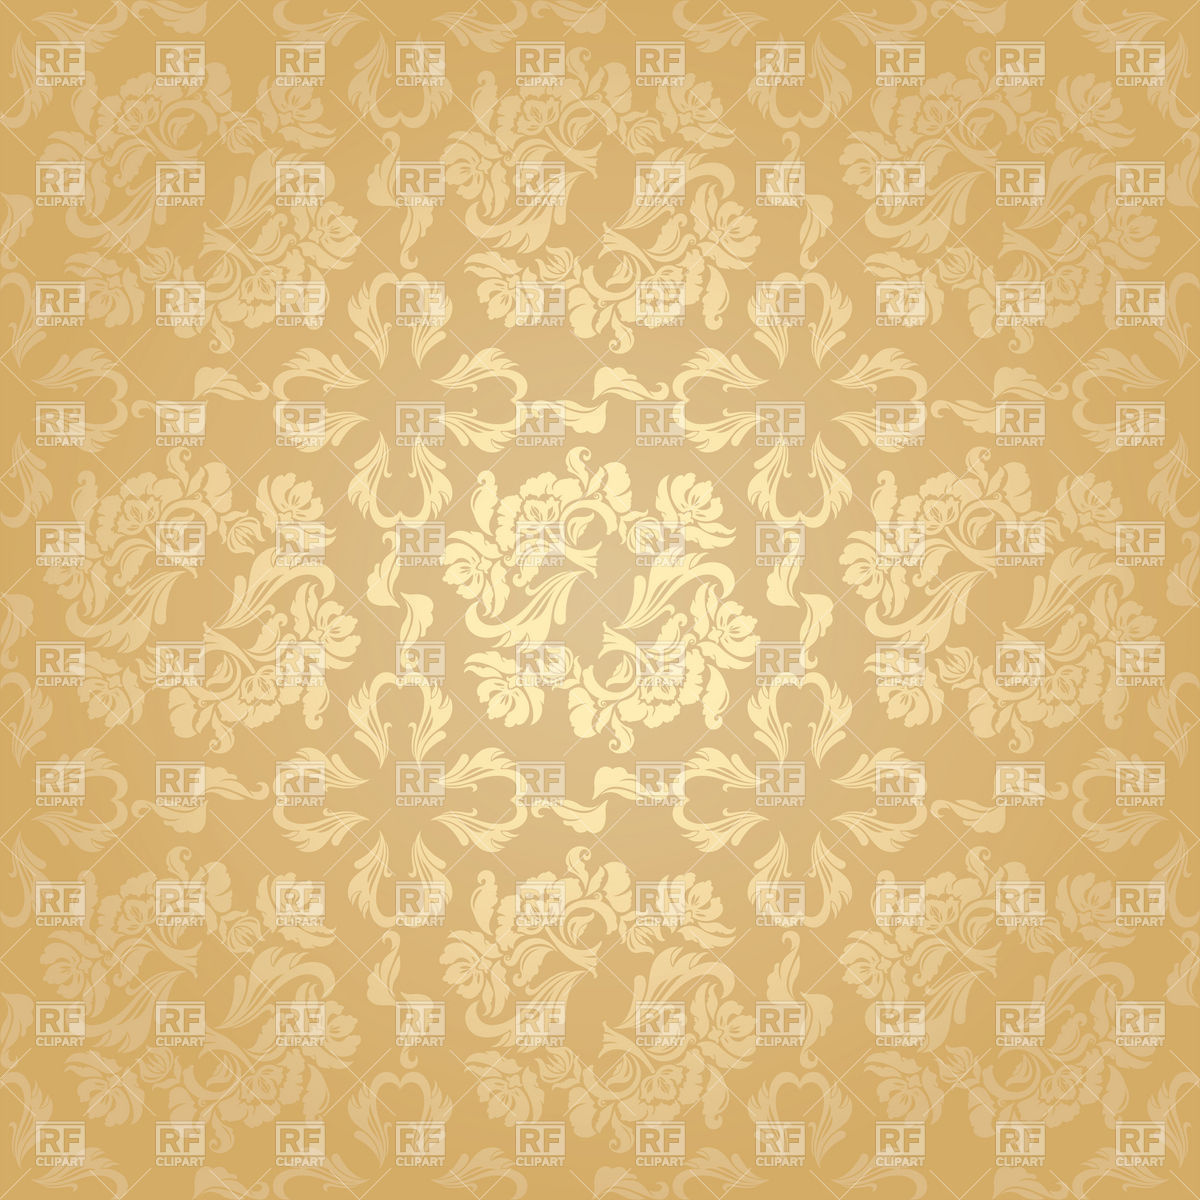 Related Pictures Seamless Wallpaper Background Floral Vintage Gold